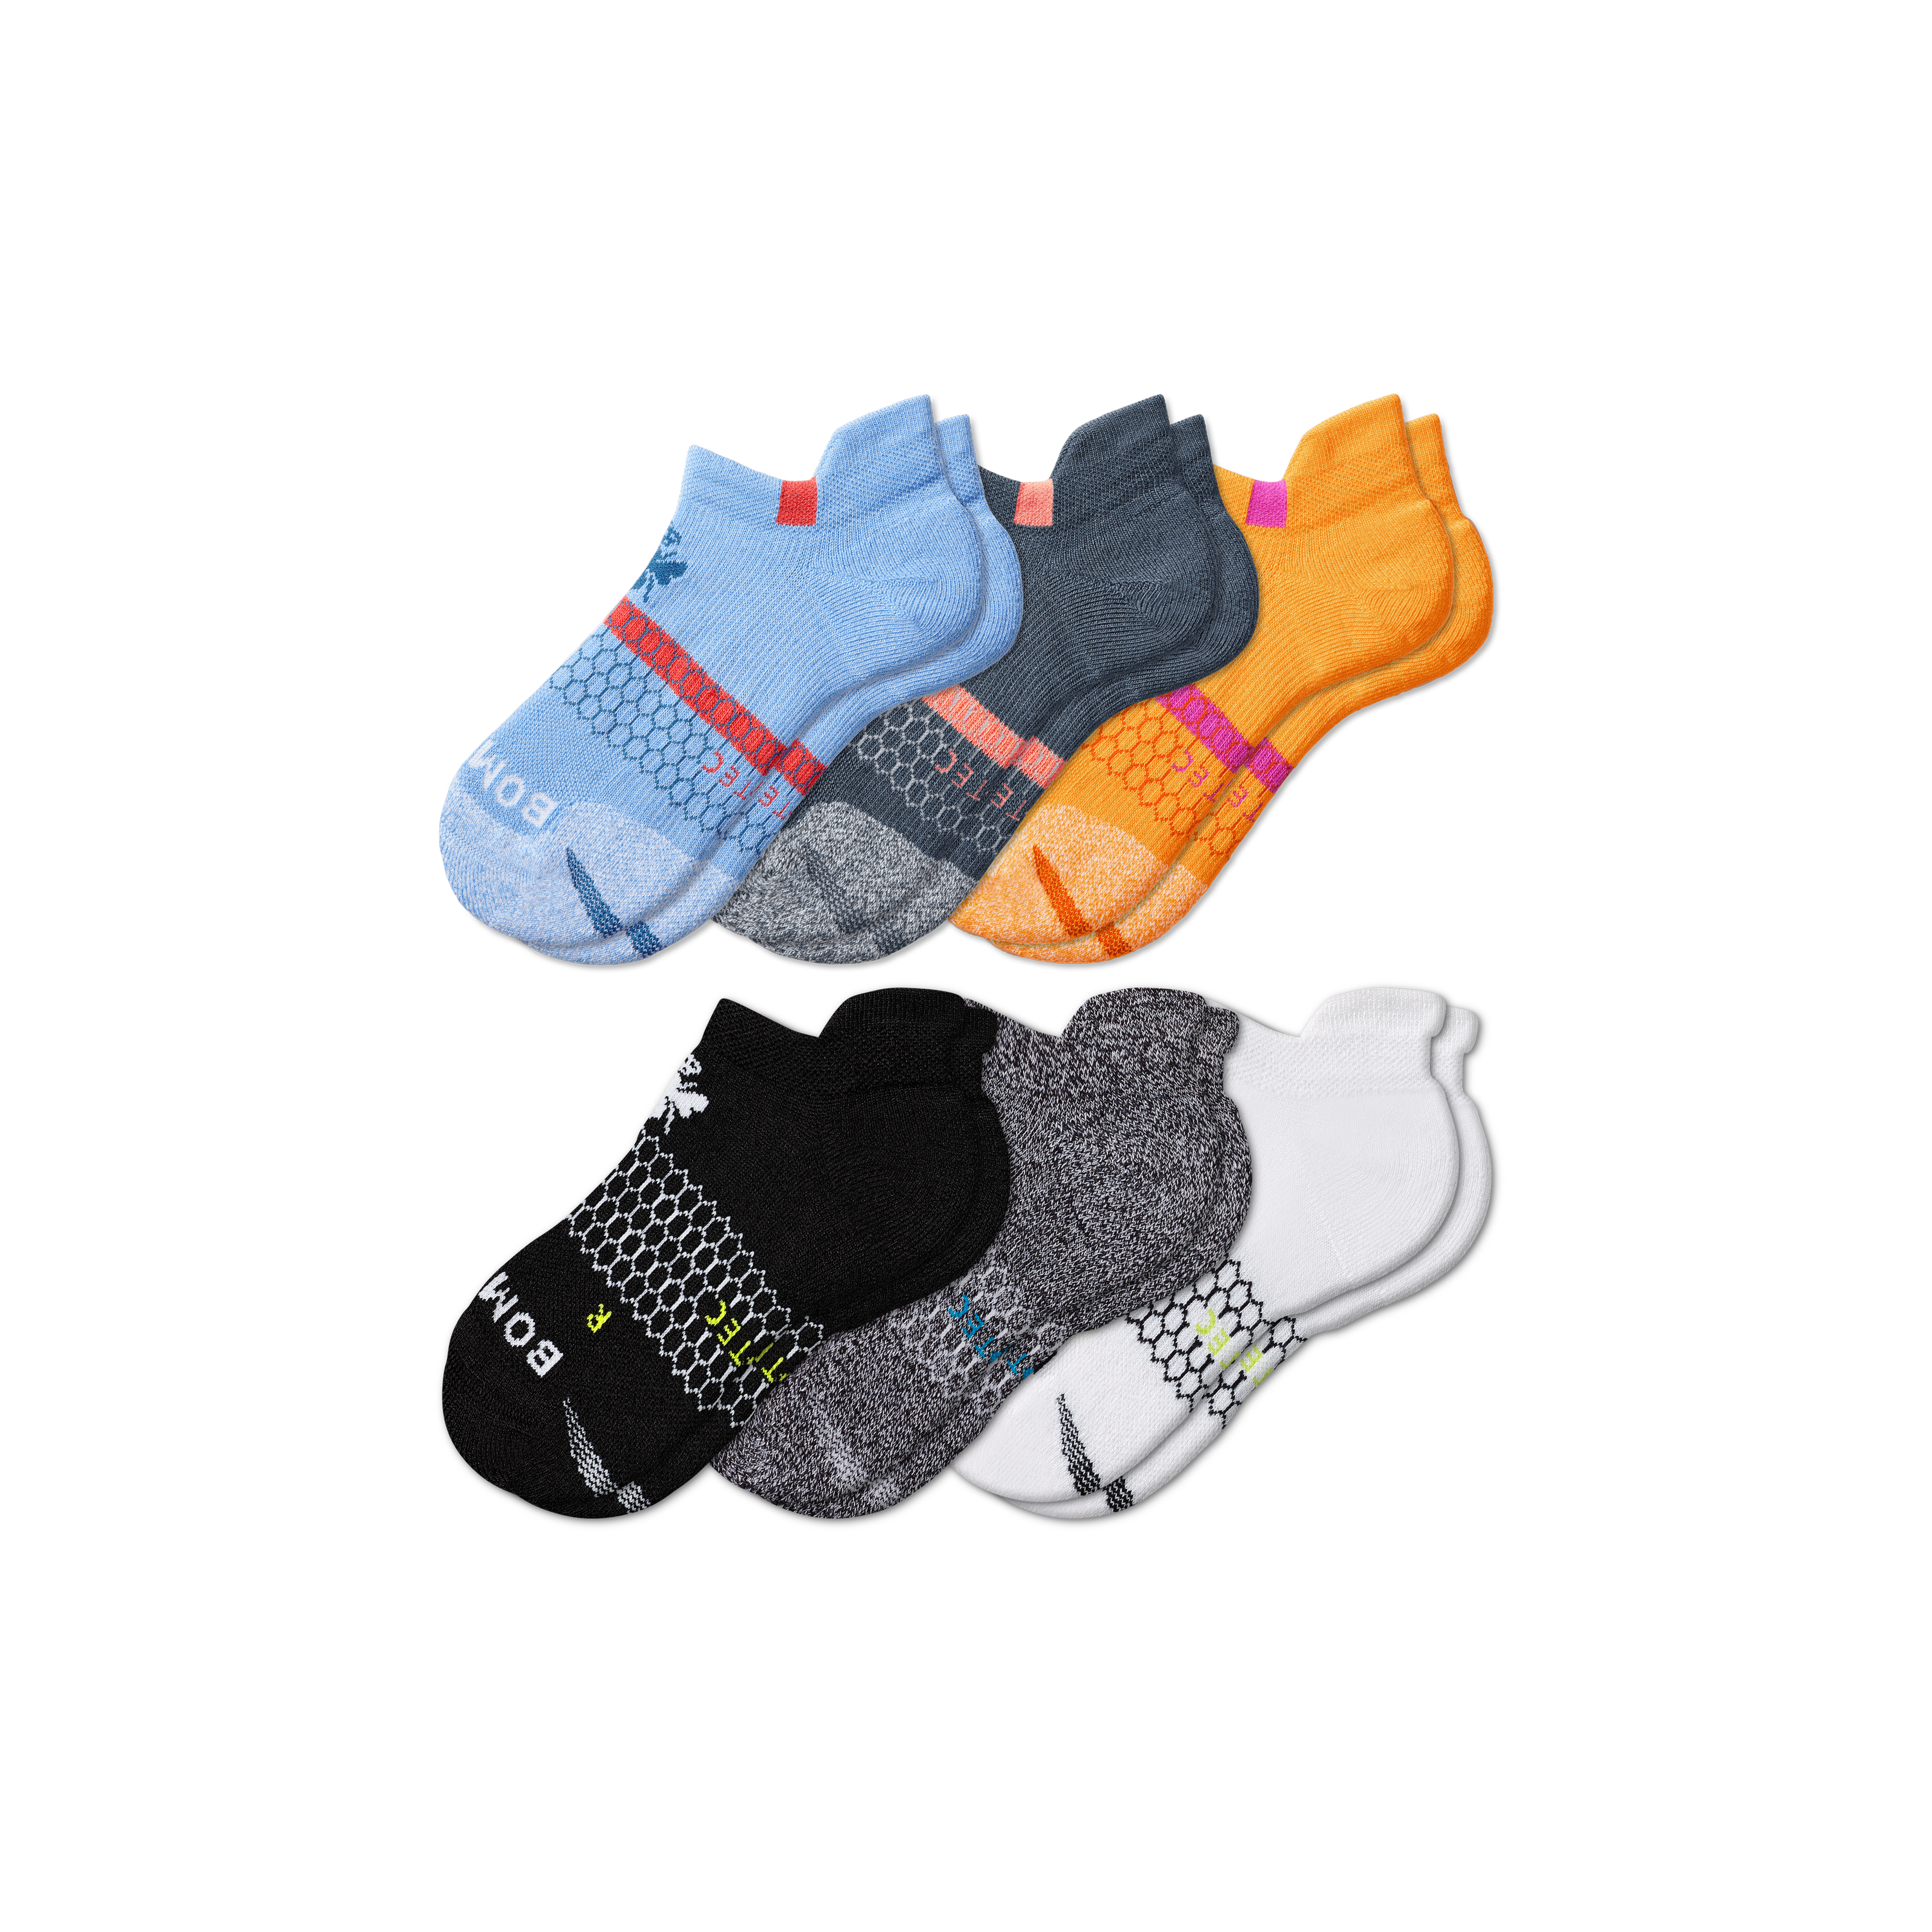 37 Pairs XS Bombas Youth Socks: All are the same size: 6.5 heel to toe